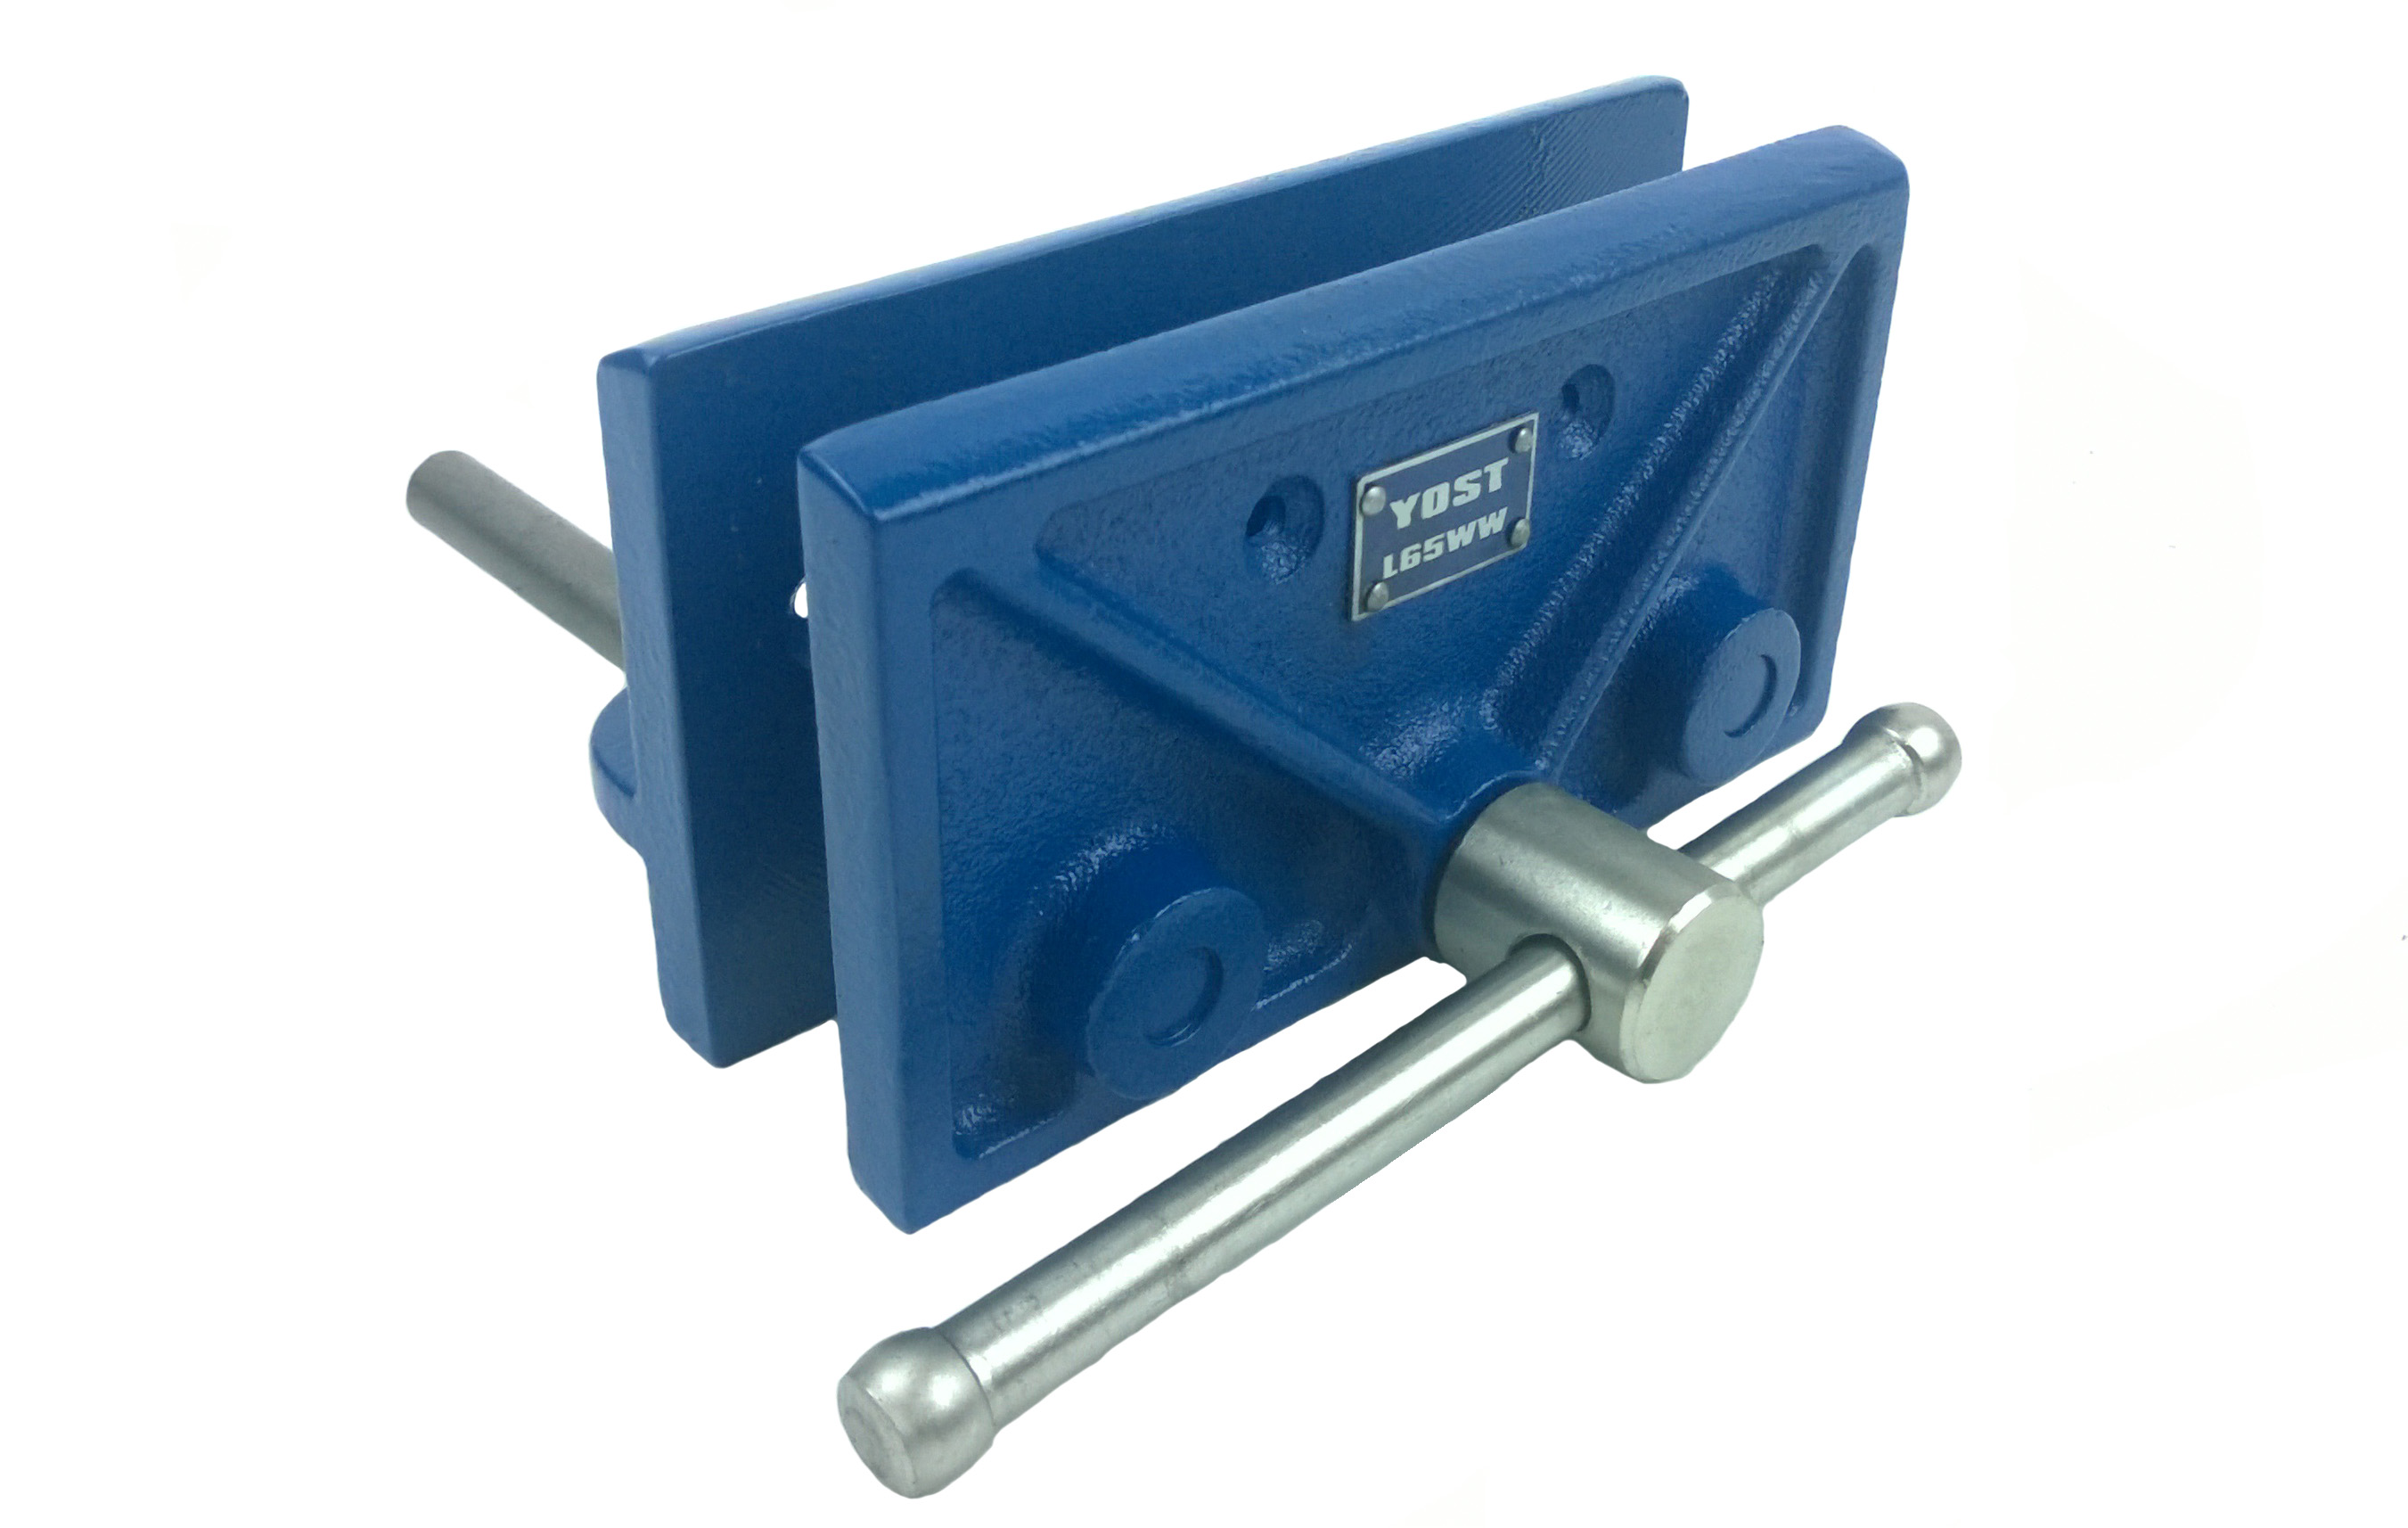 Yost Hobby Woodworking Vise